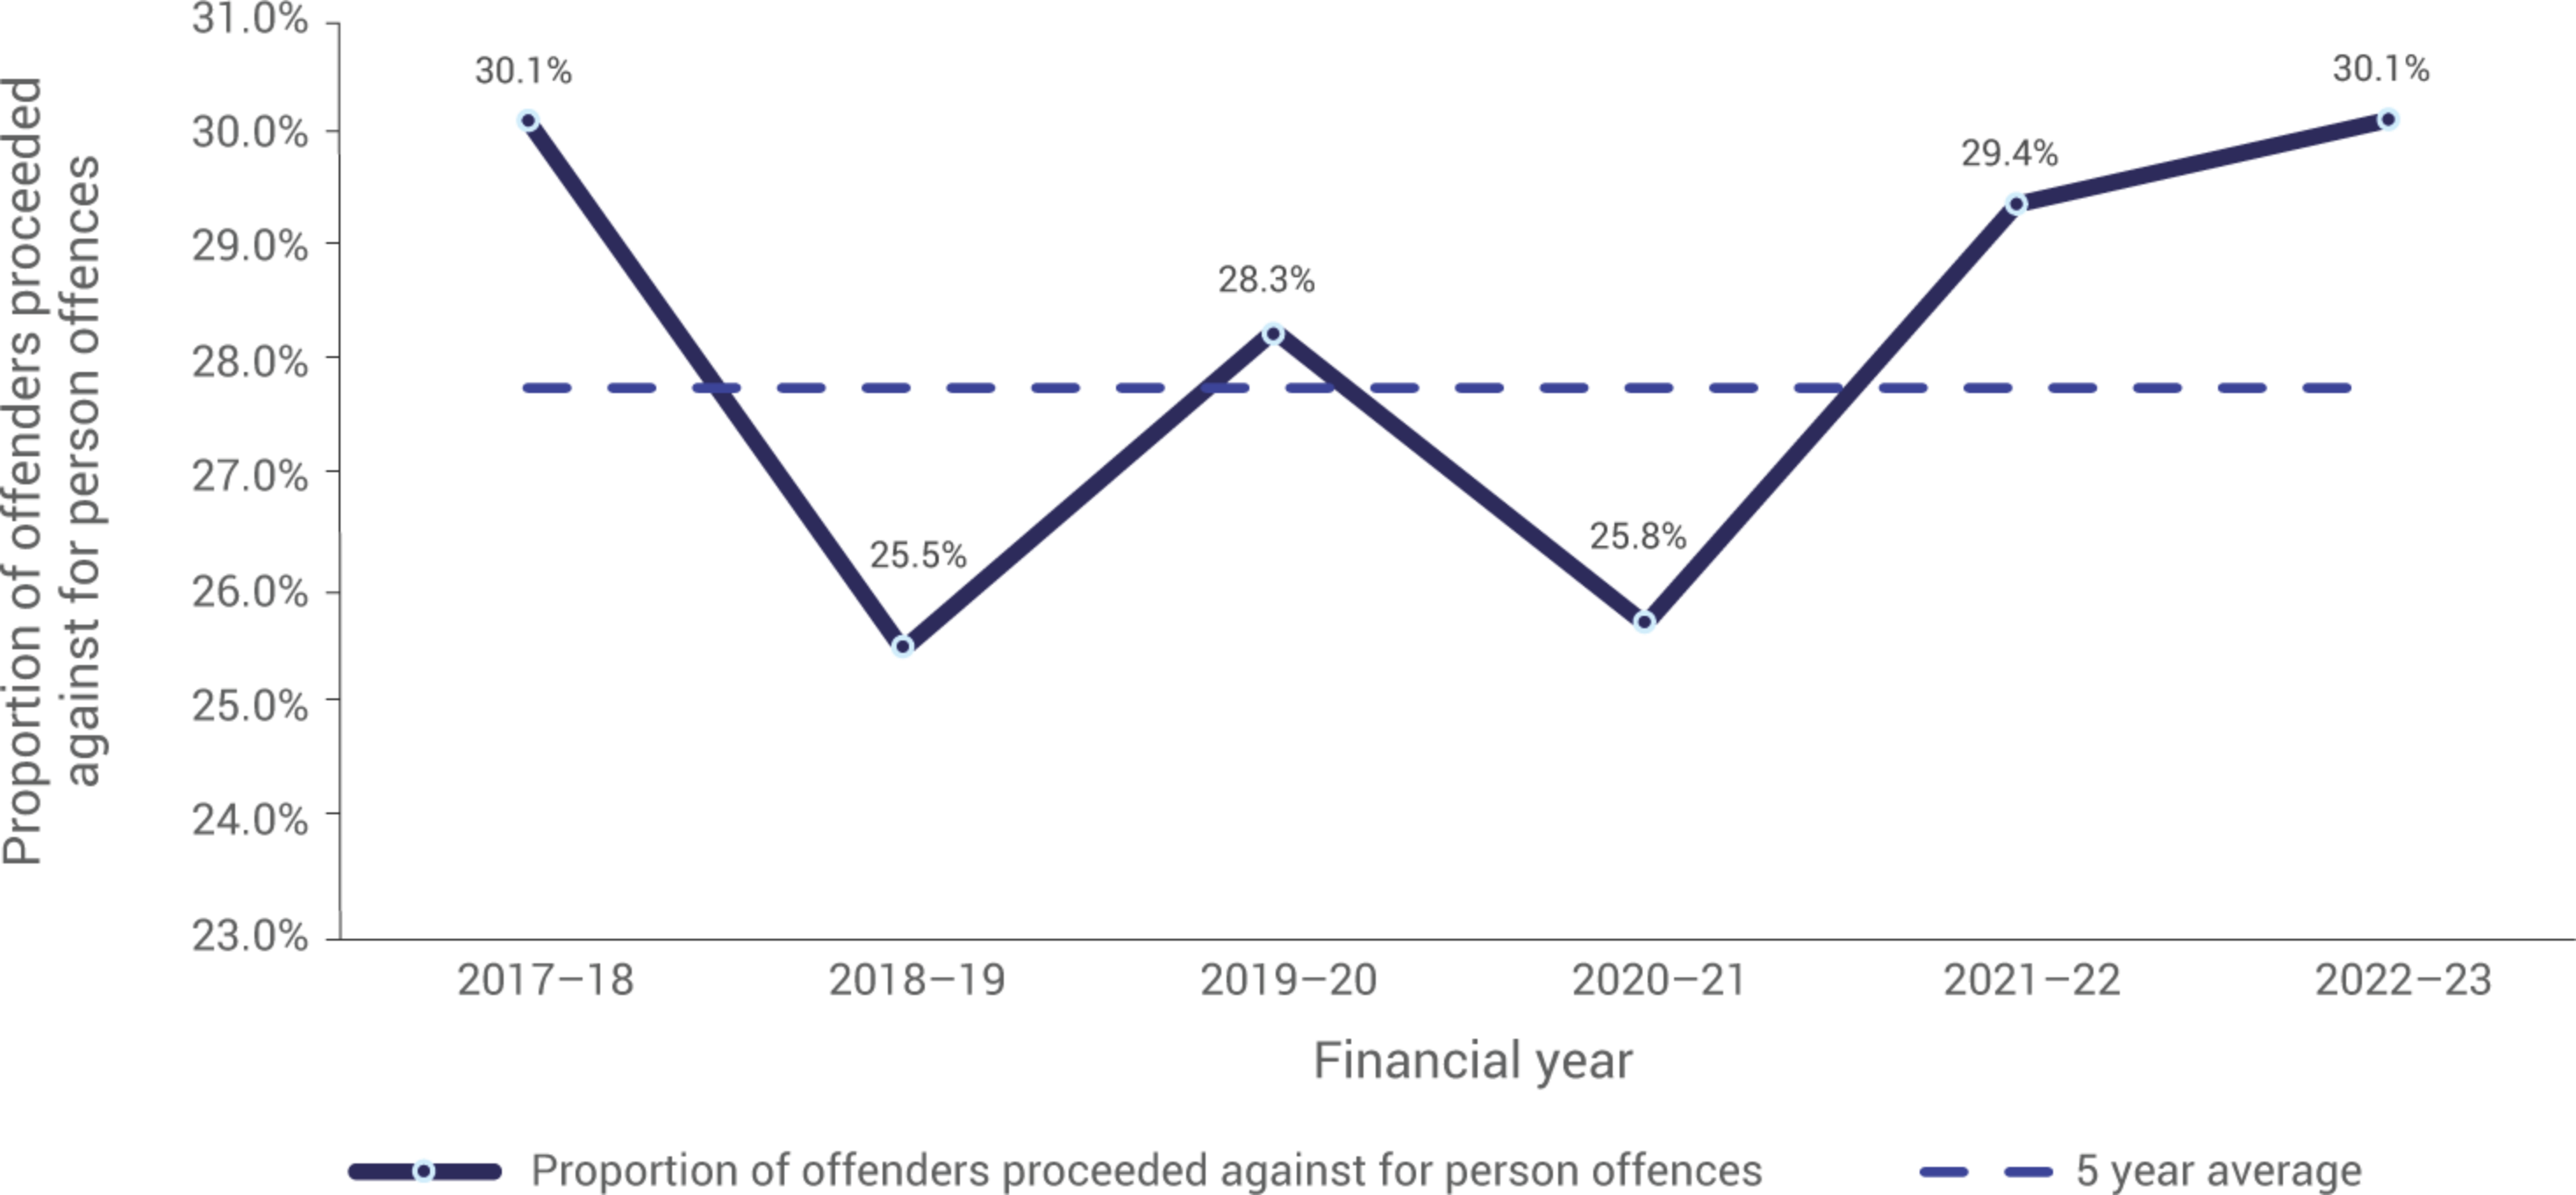 This Figure is a line graph depicting the proportion of offenders proceeded against for person offences over a six-year period, from the 2017-18 financial year to the 2022-23 financial year.